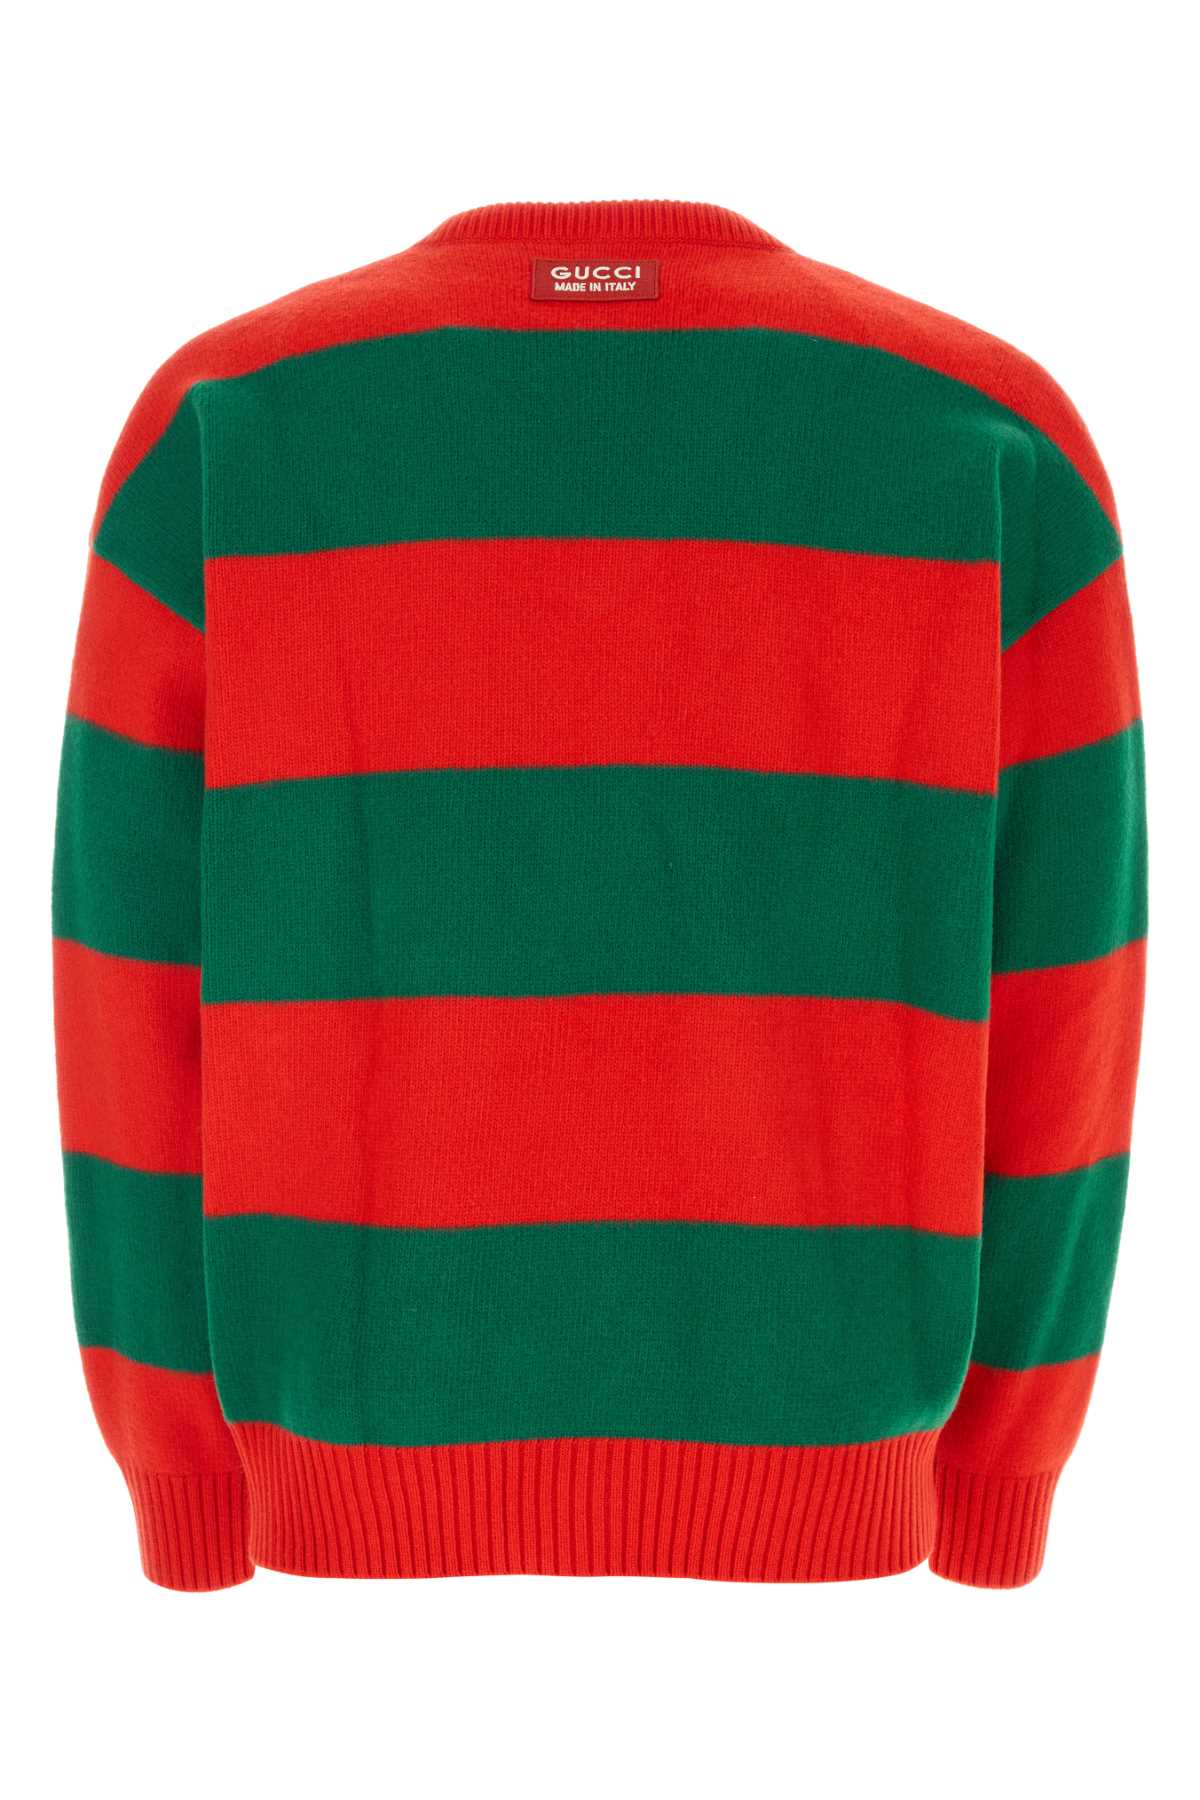 Shop Gucci Embroidered Stretch Wool Blend Sweater In Liveredgreen